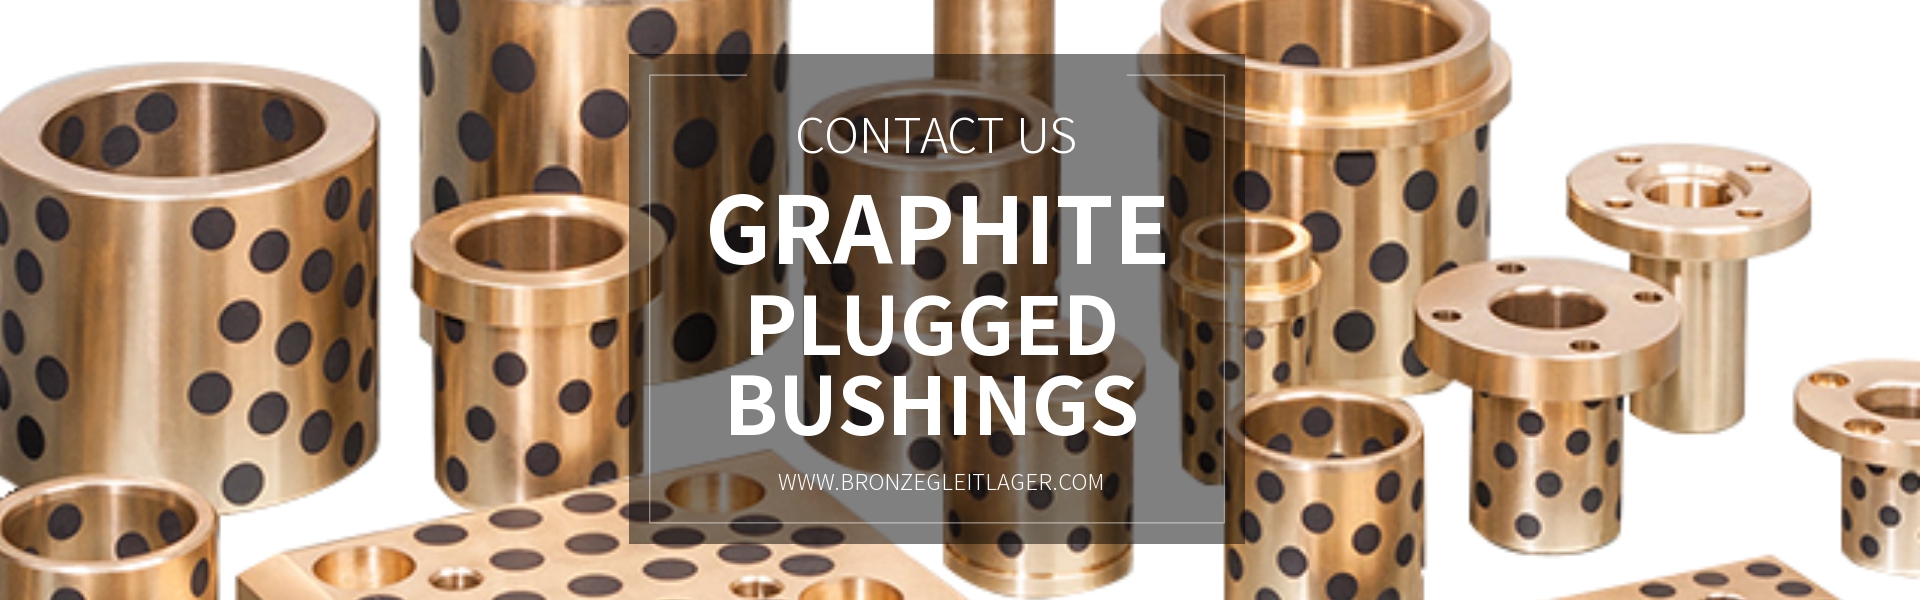 GRAPHITE PLUGGED BUSHINGS engaged in manufacturing, marketing and exporting bronze bushing for SEMI AUTOMATIC, AUTOMATIC HIGH SPEED BOTTLING LINES & PACKAGING MACHINES